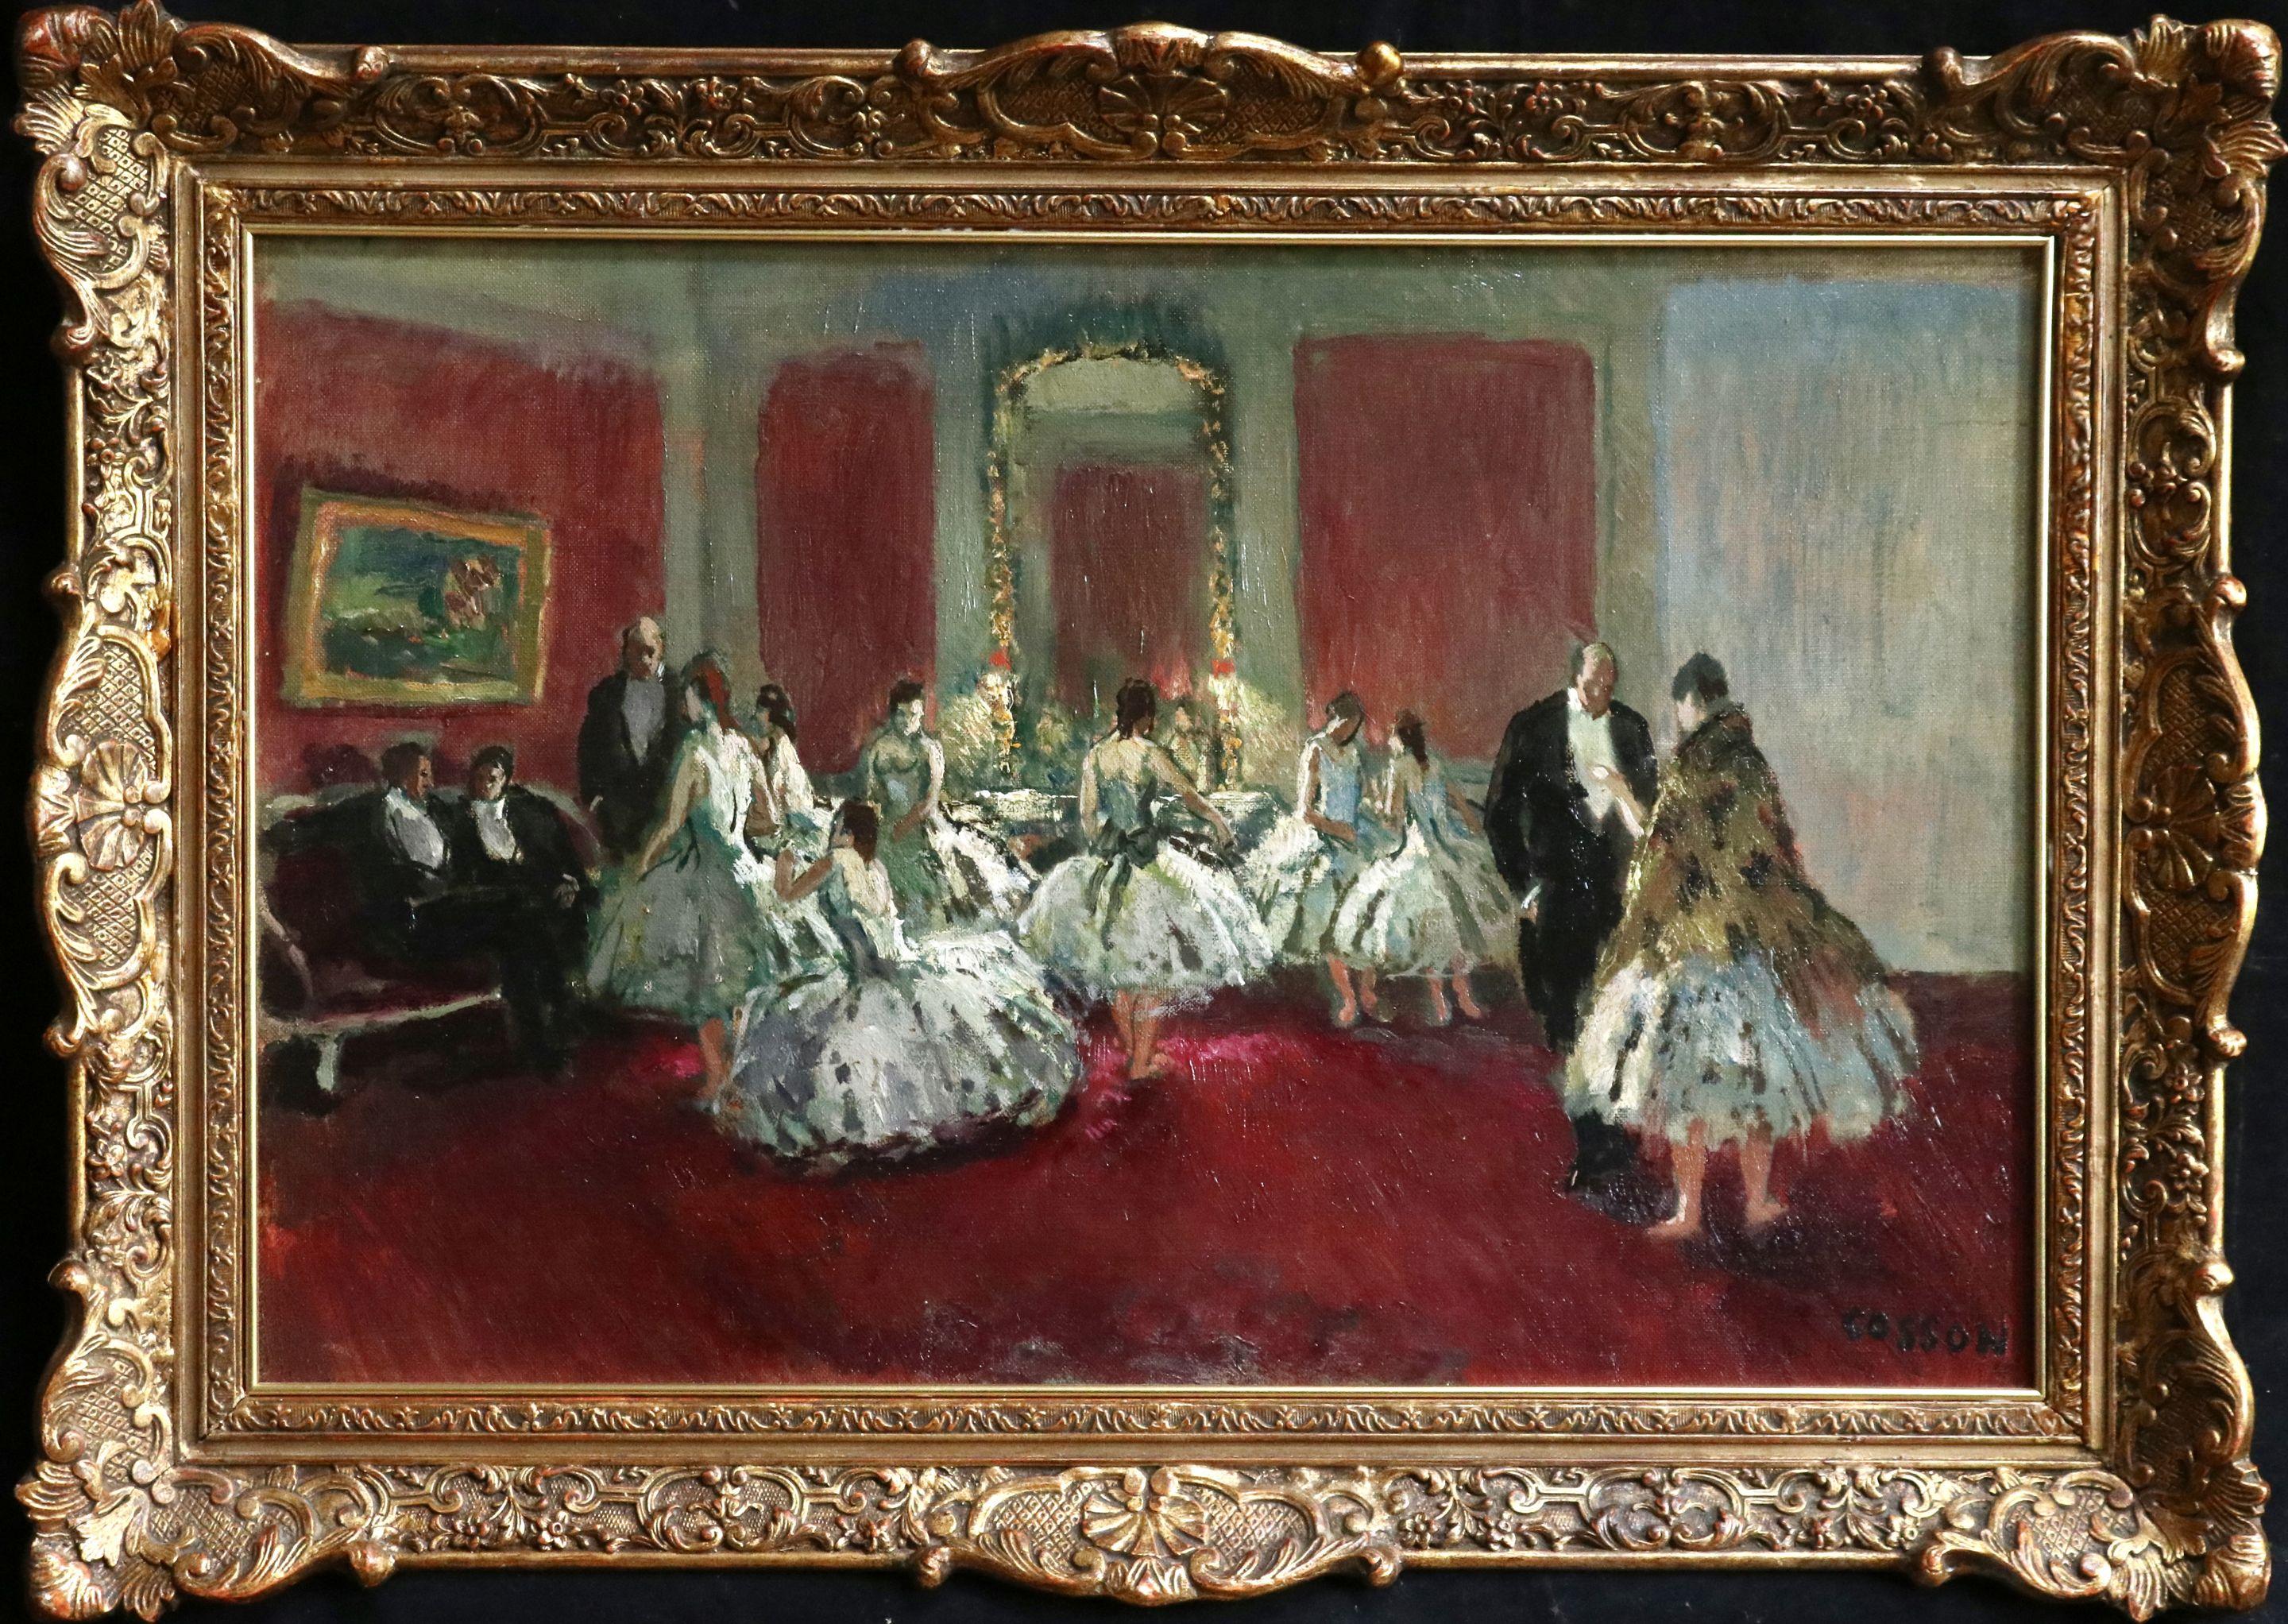 Jean-Louis-Marcel Cosson Interior Painting - Danseuse - 20th Century Oil, Ballet Dancers in Interior by Marcel Cosson